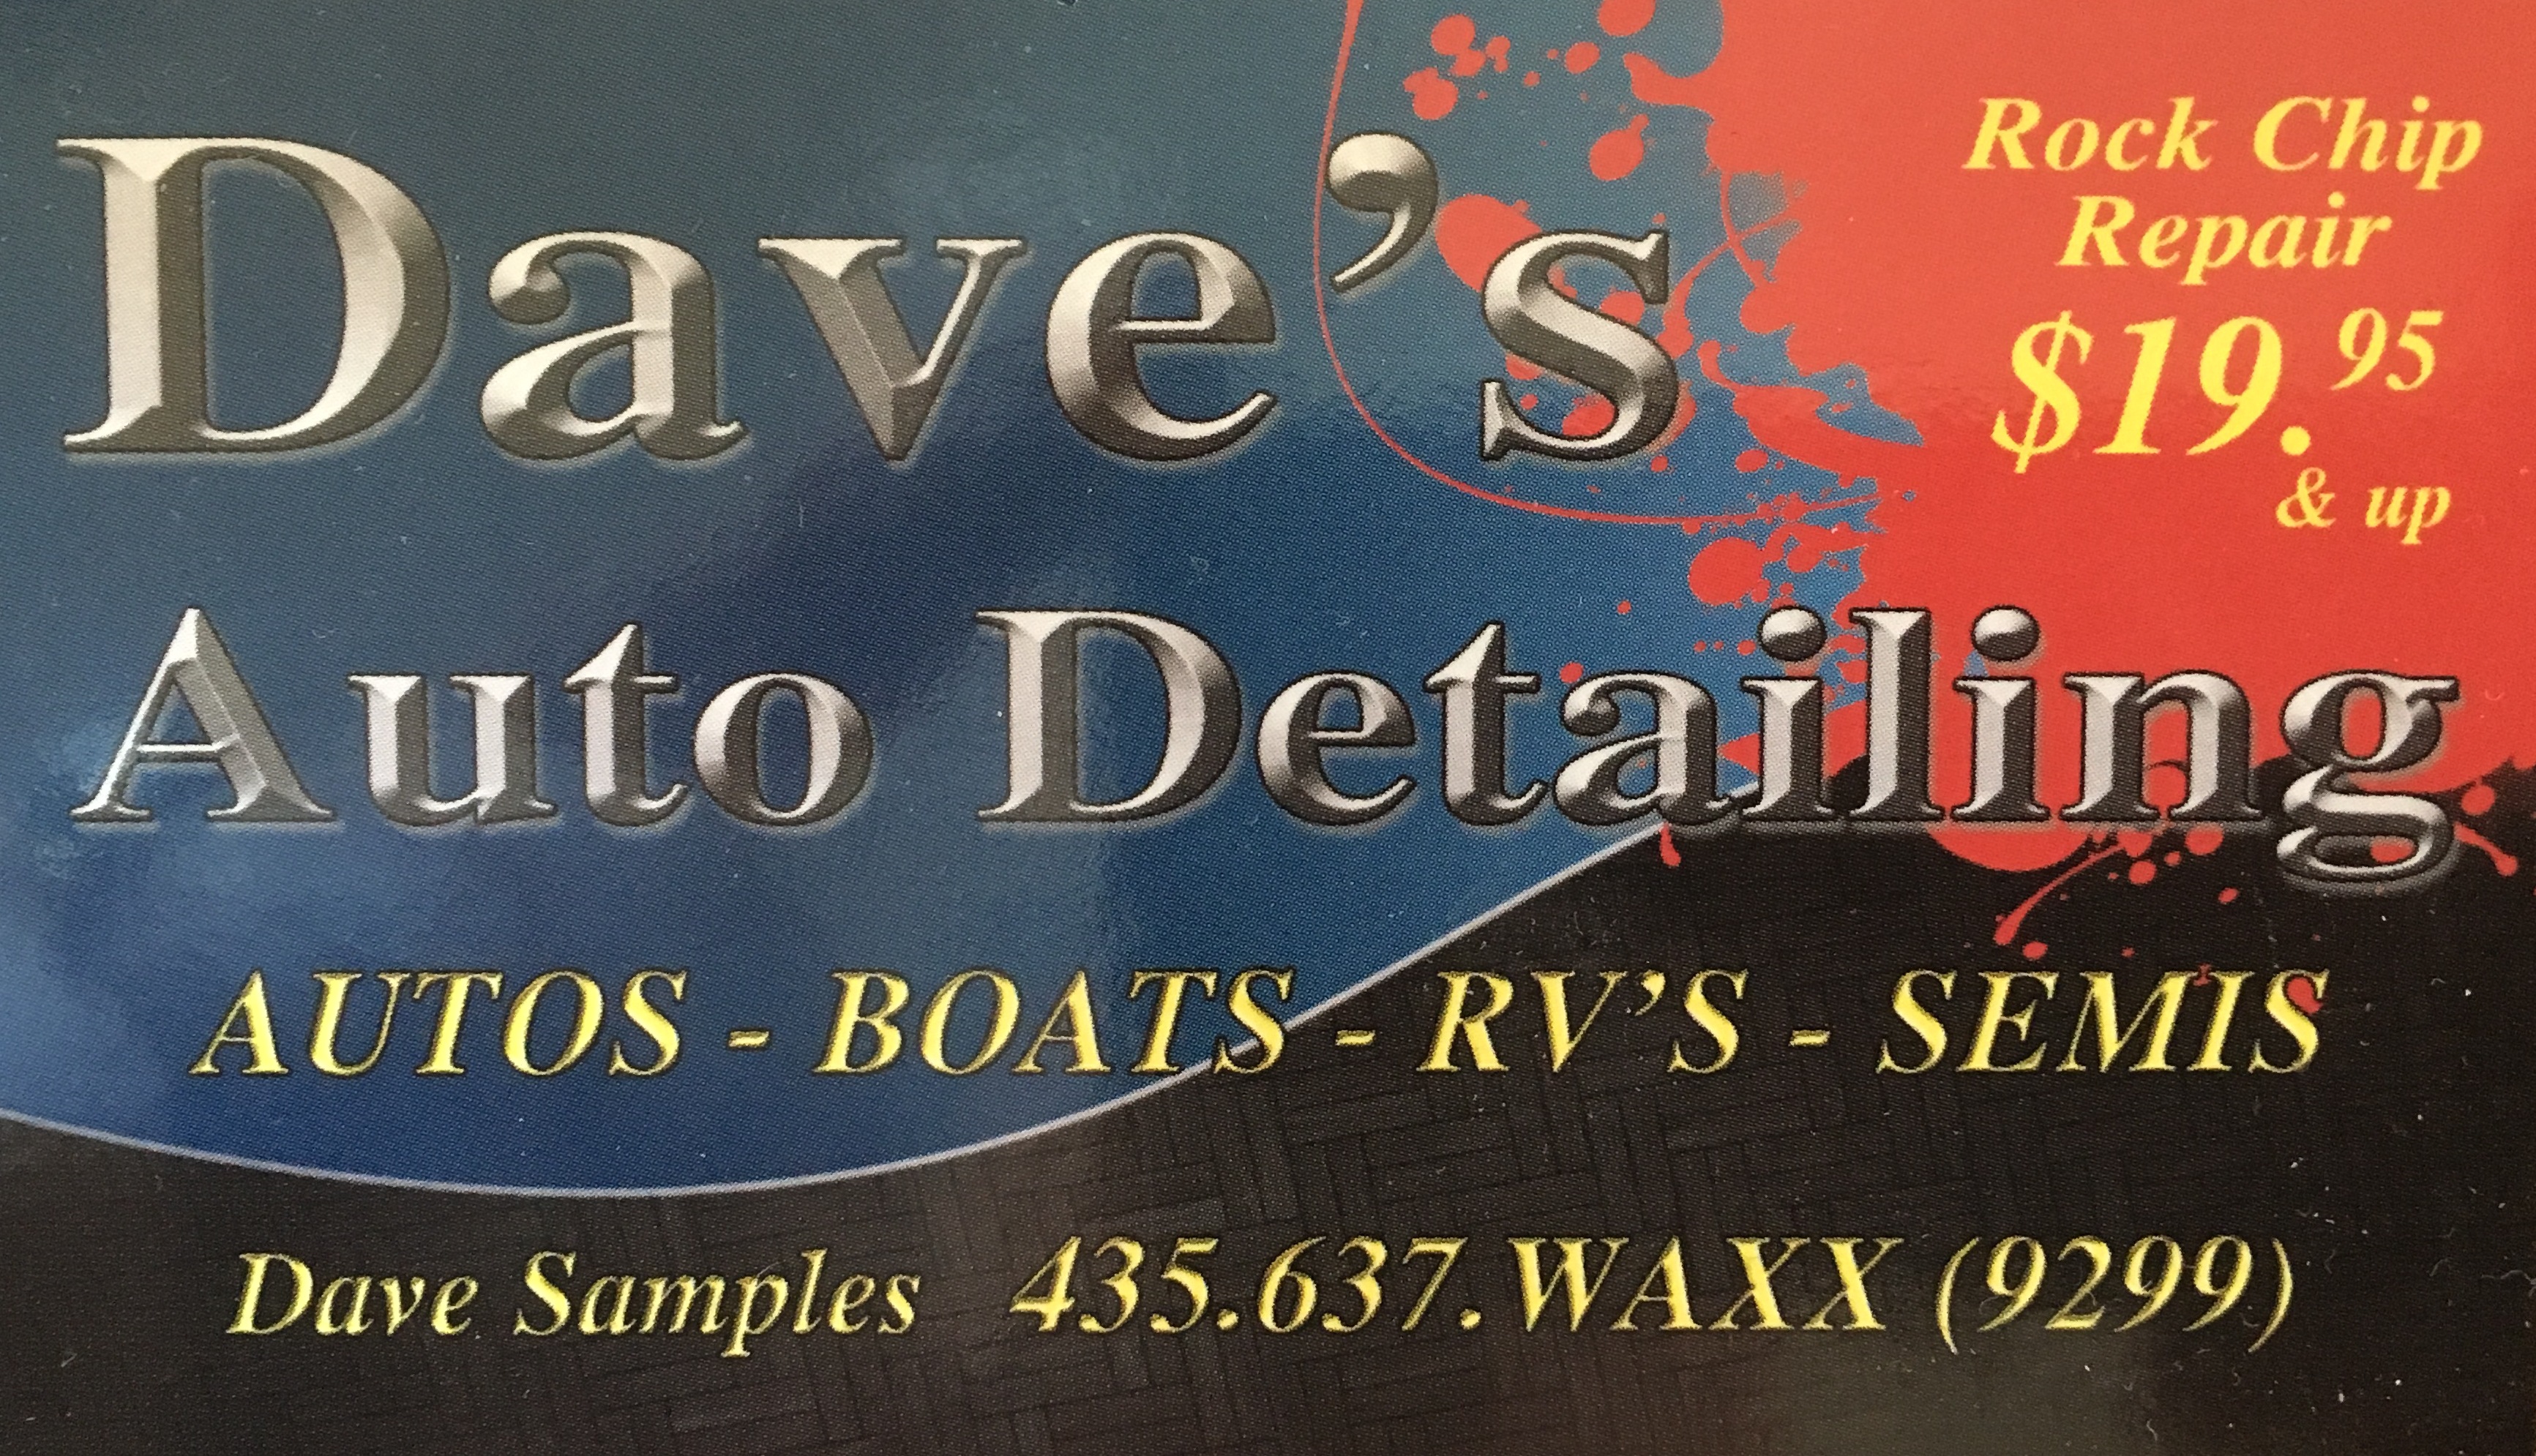 Dave's Auto Detailing